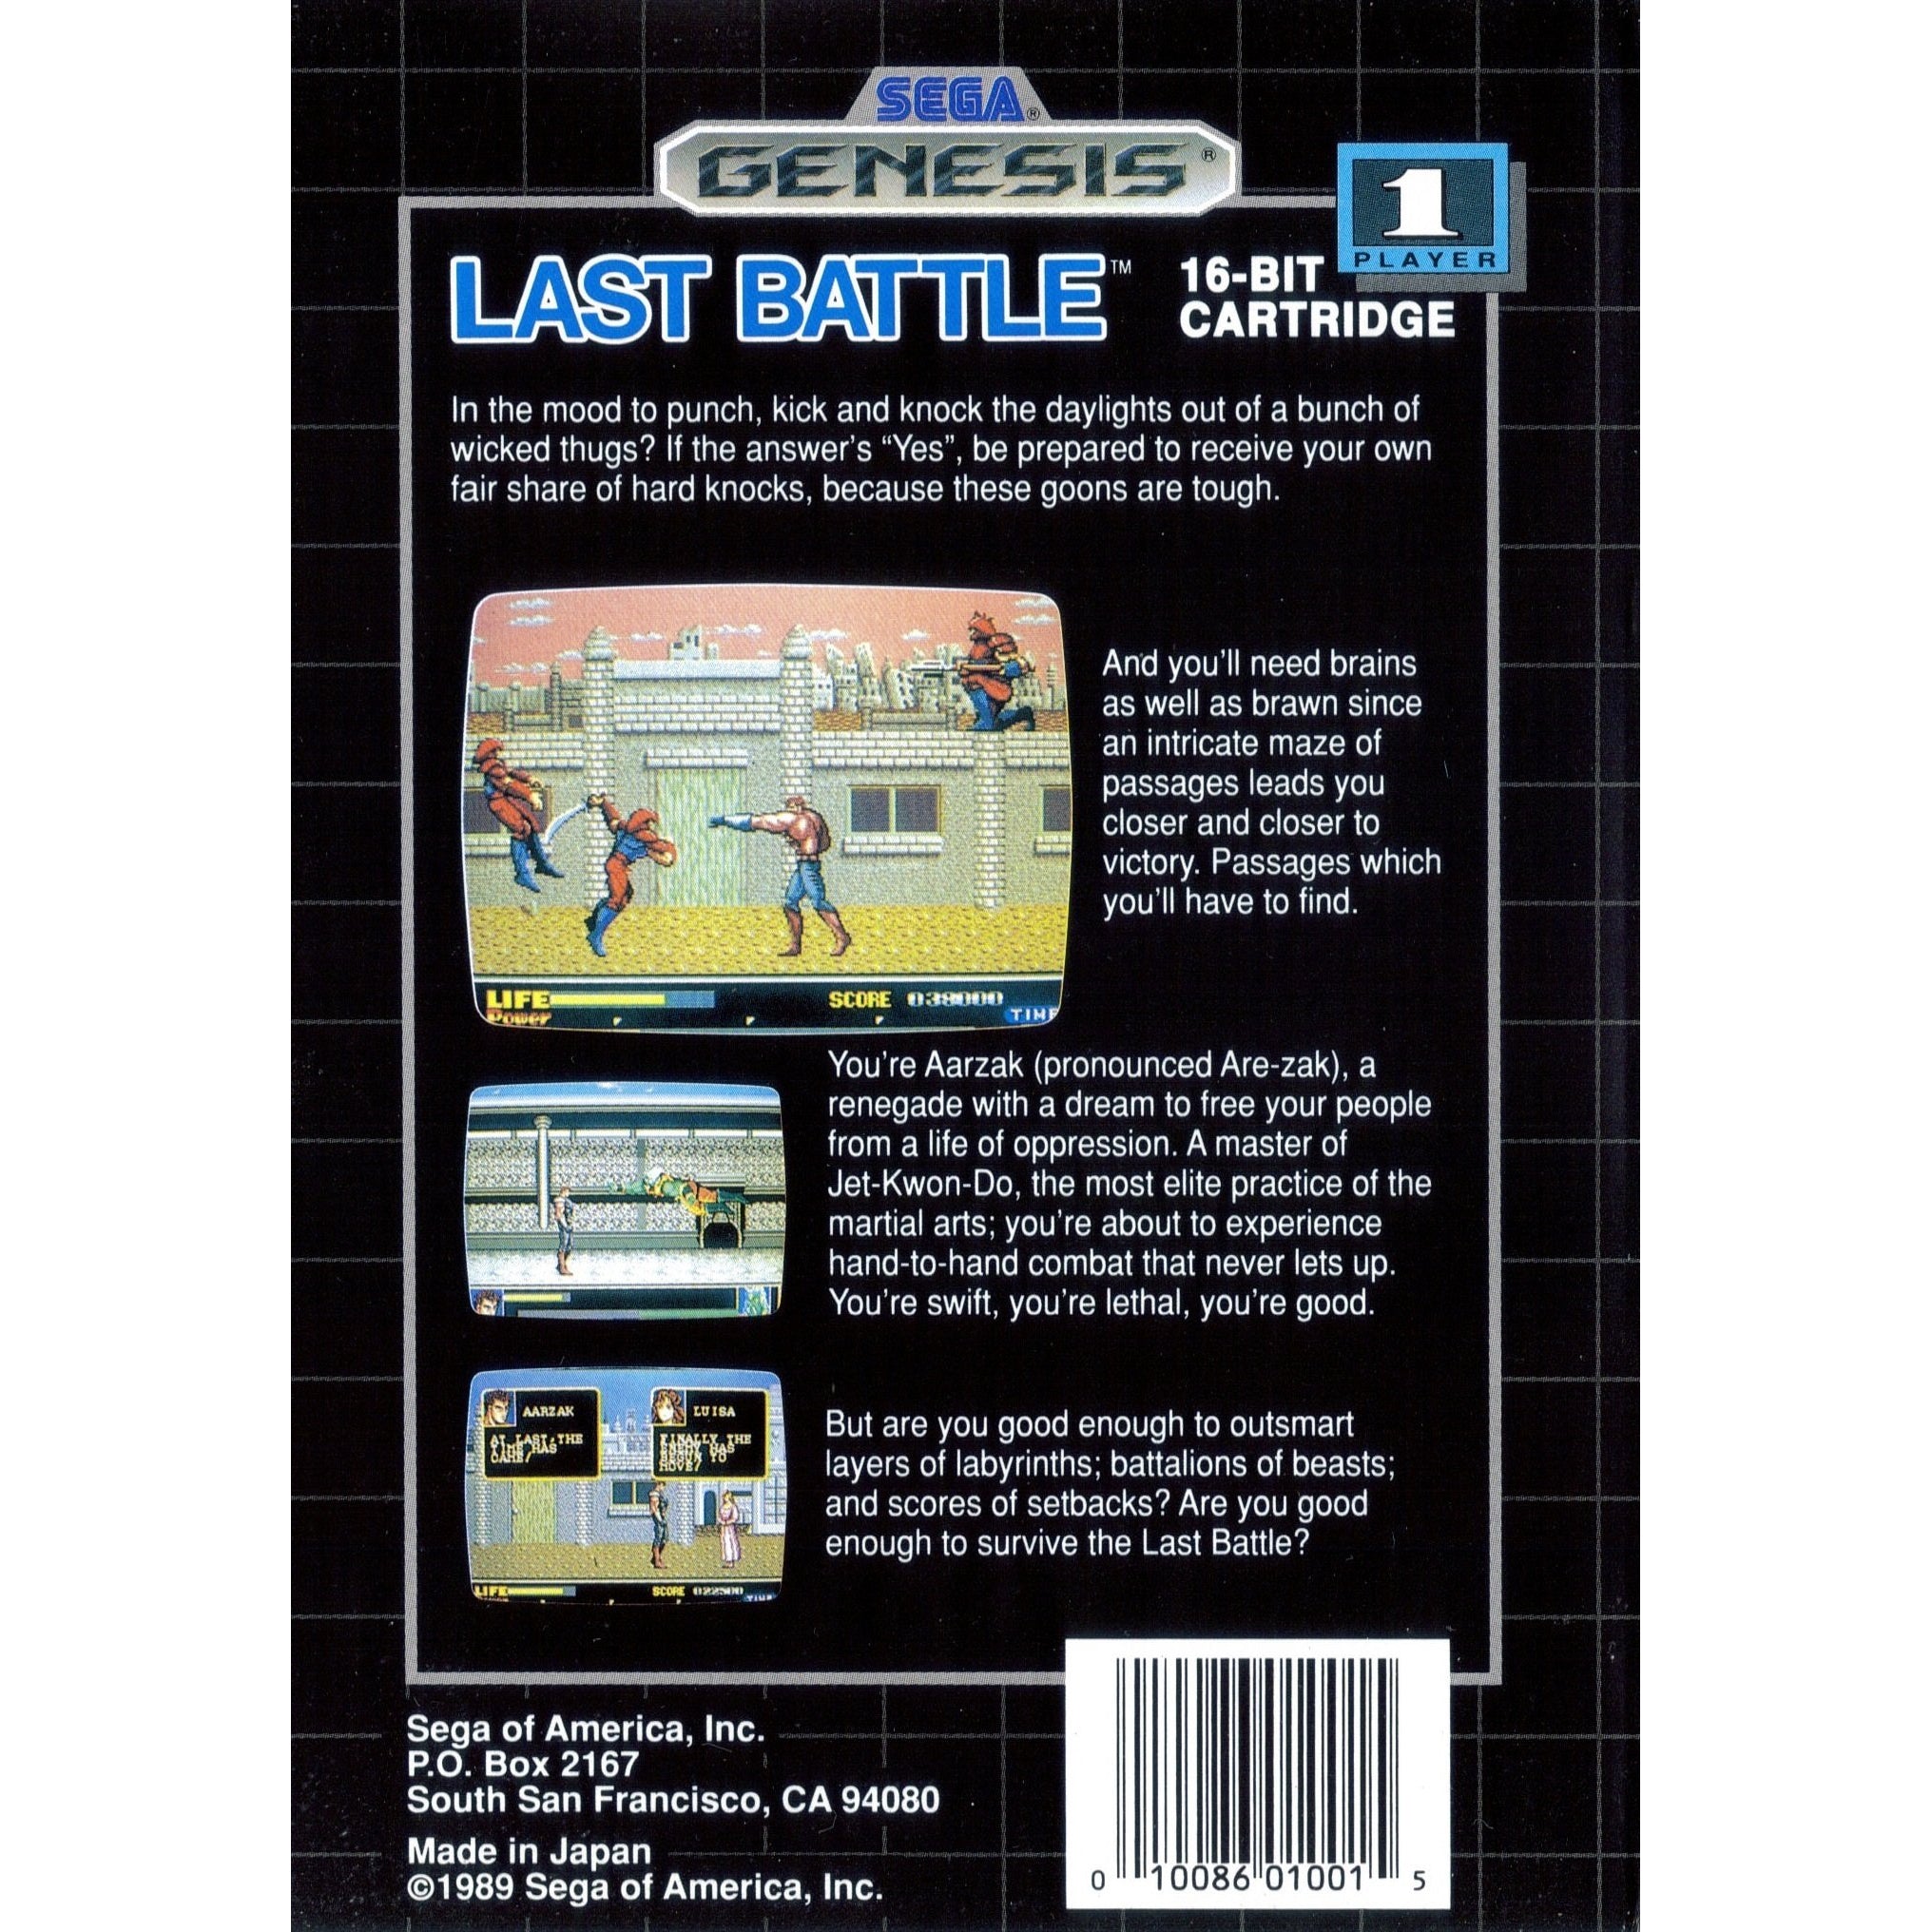 Last Battle - Sega Genesis Game Complete - YourGamingShop.com - Buy, Sell, Trade Video Games Online. 120 Day Warranty. Satisfaction Guaranteed.